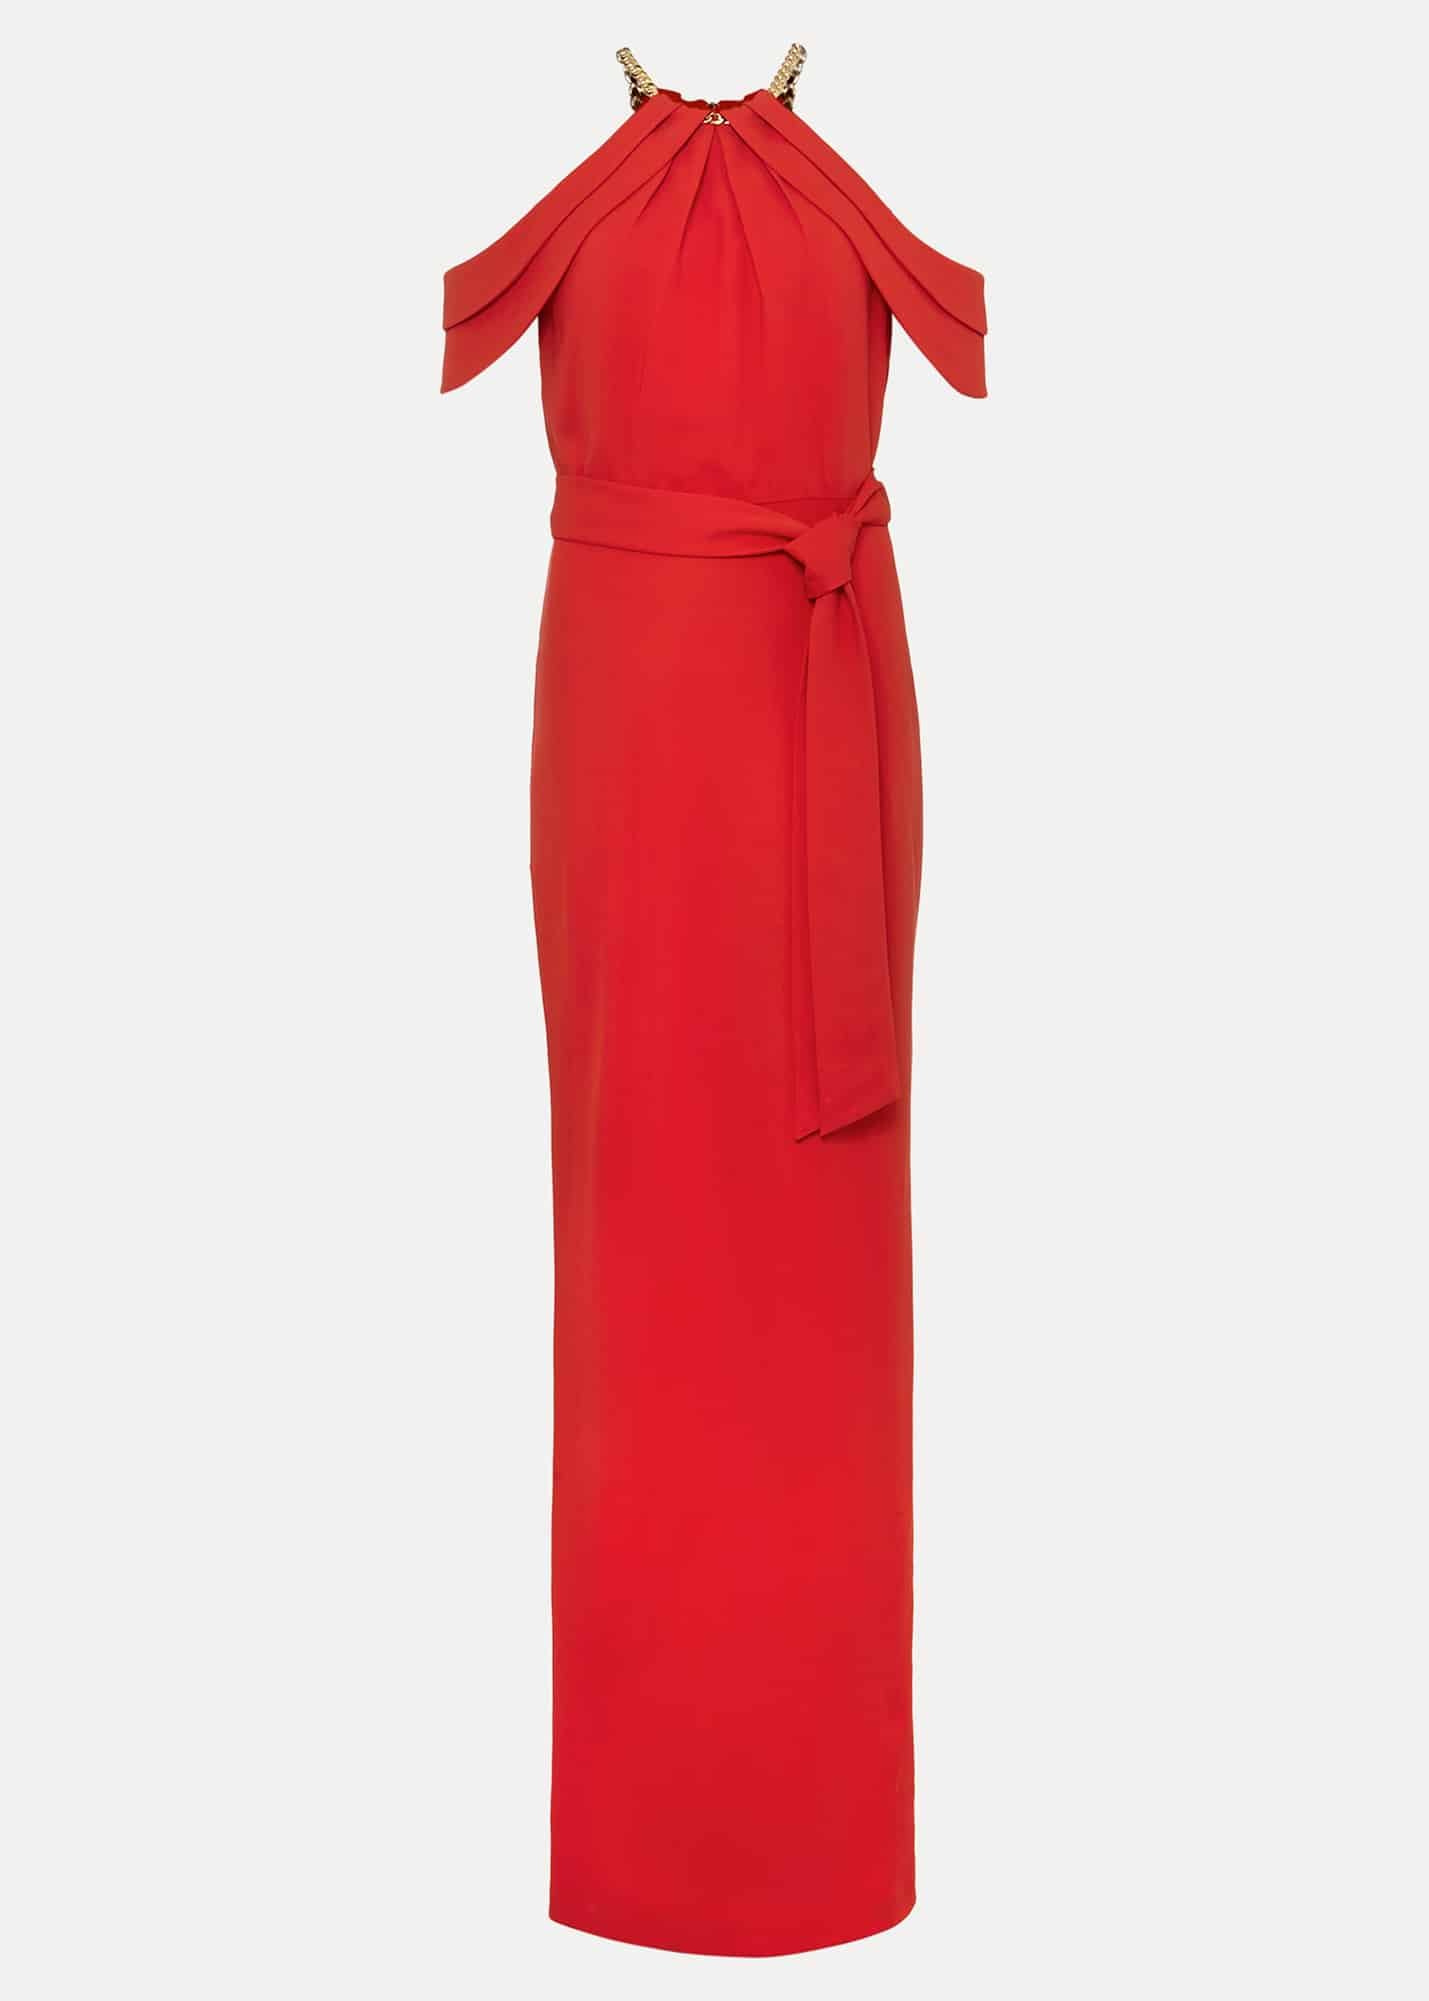 PHASE EIGHT Elaine Chain Detail Maxi Dress in Red | Endource